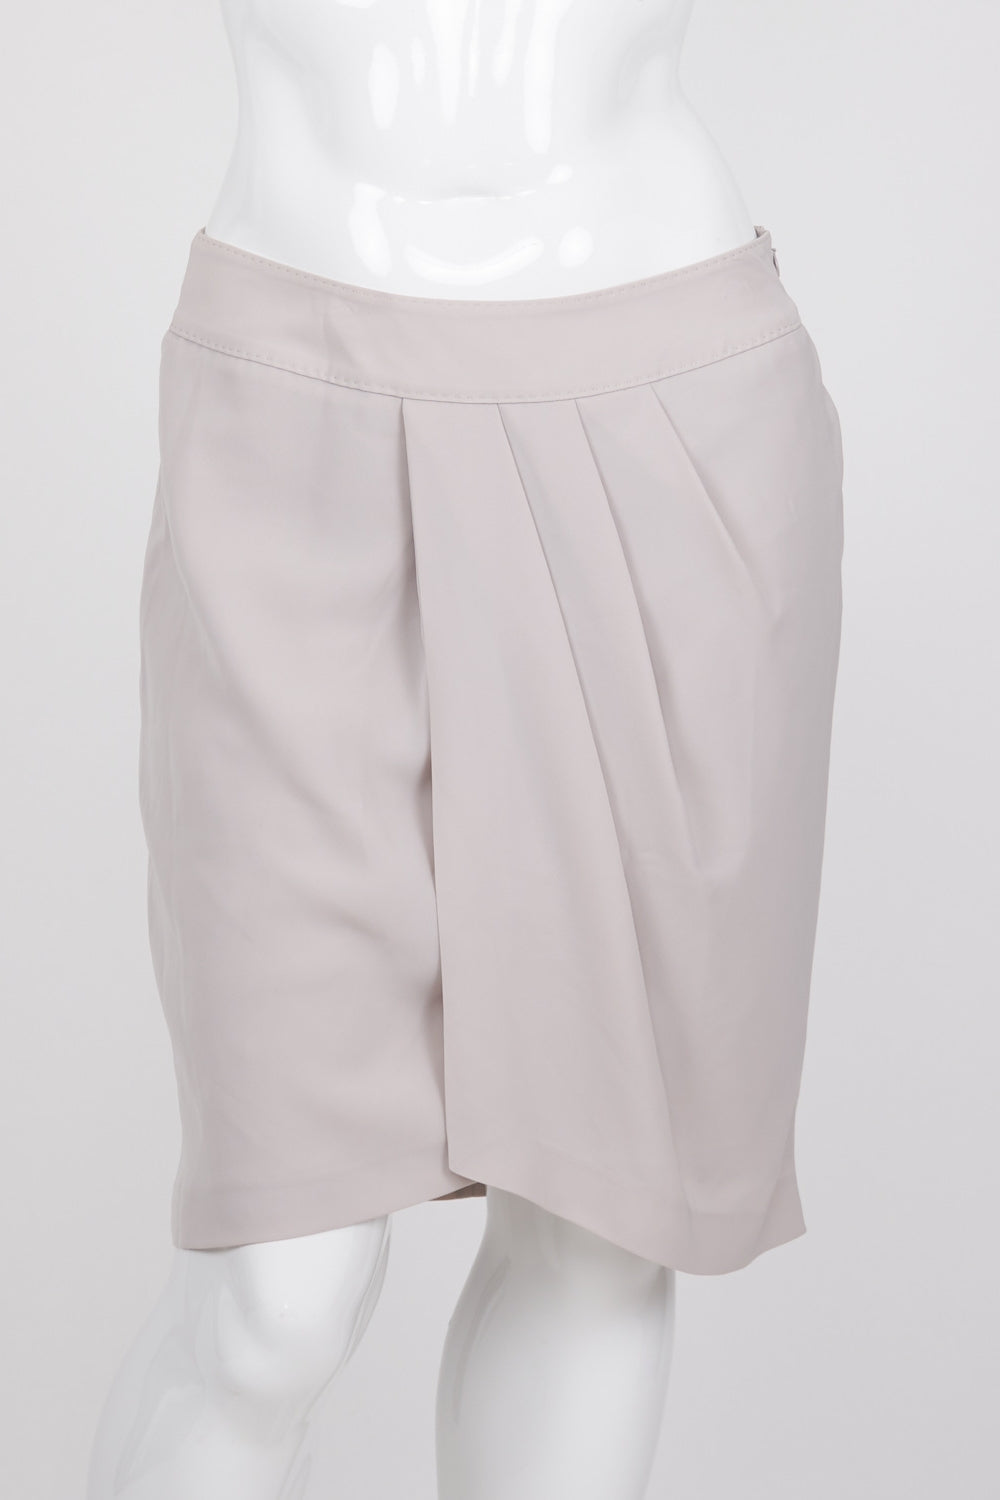 David Lawrence Beige Pleated Front Skirt 14